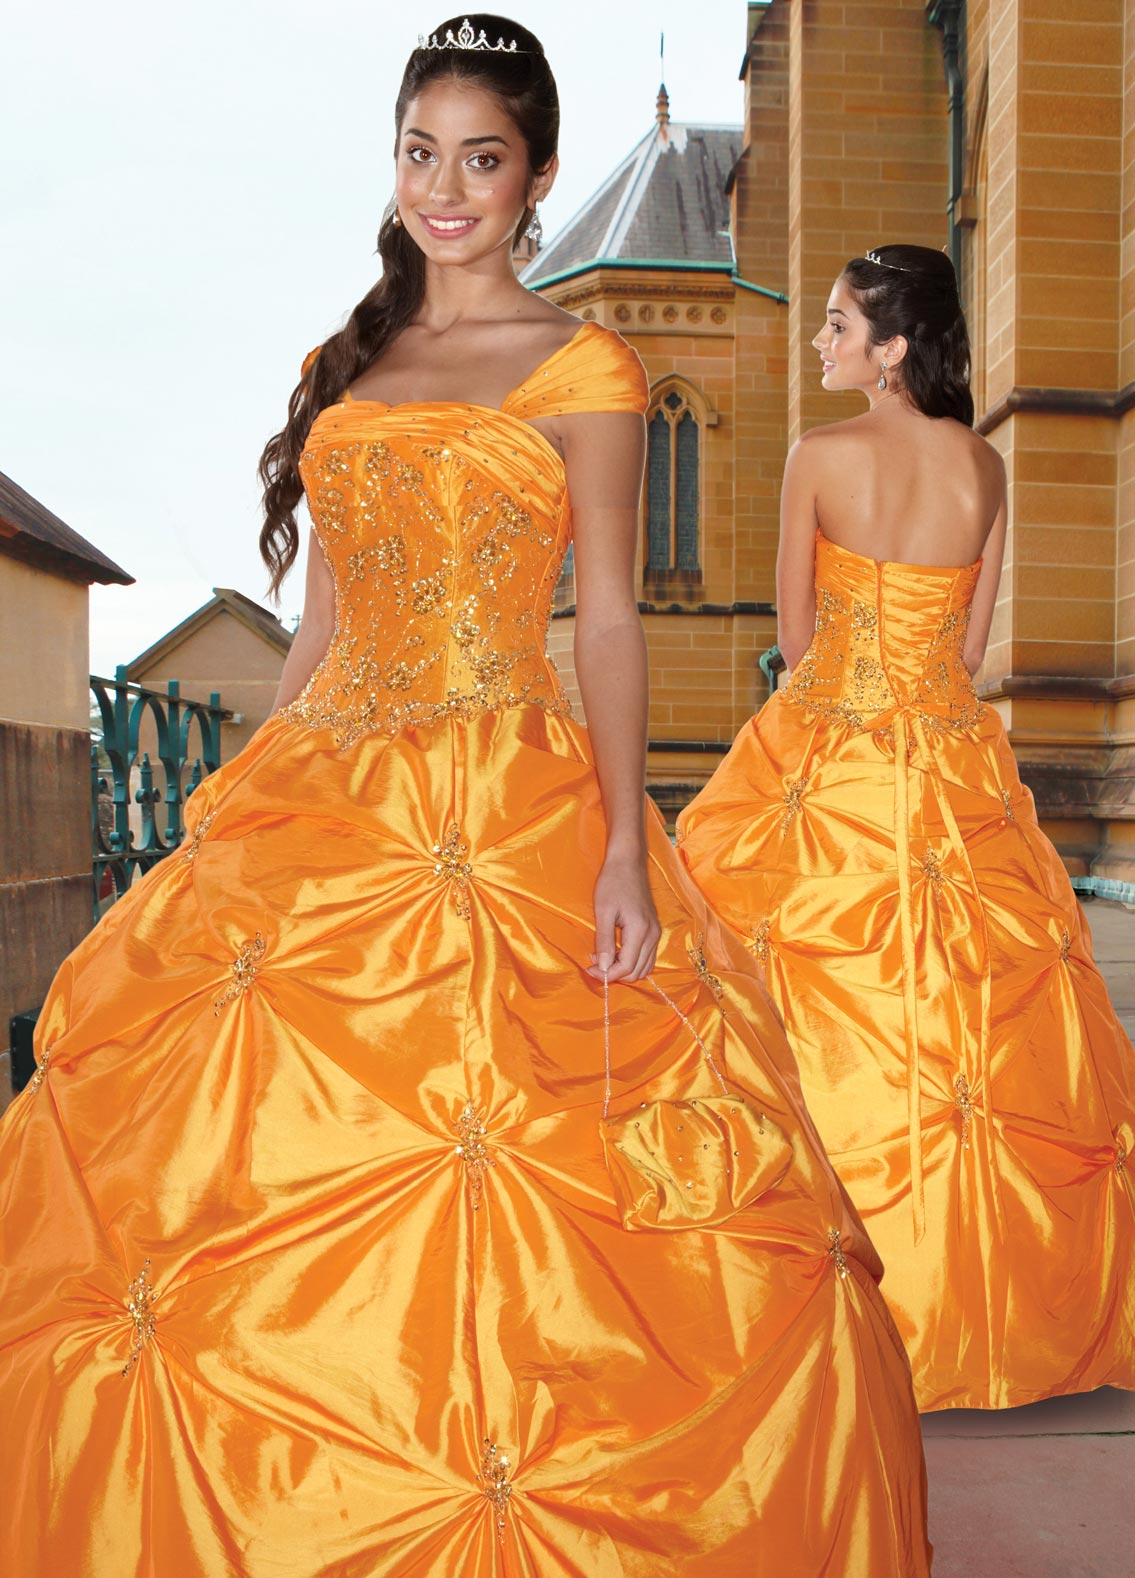 Orange Ball Gown Cap Sleeved Lace Up Full Length Quinceanera Dresses With Beading And Twist Drapes